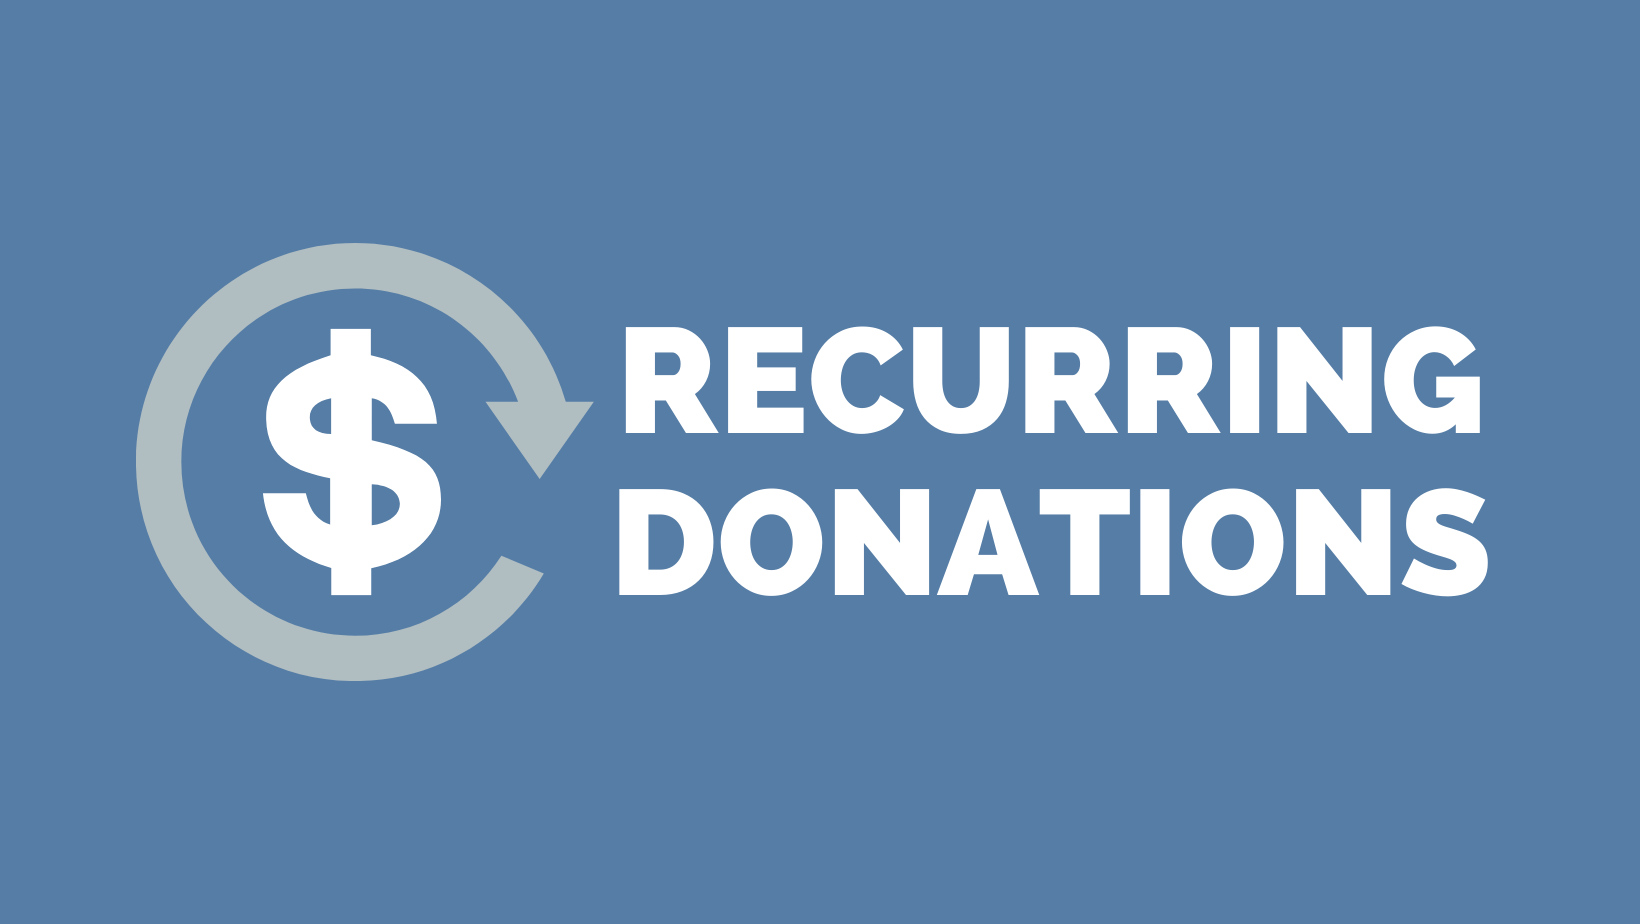 Guide to Recurring Donations